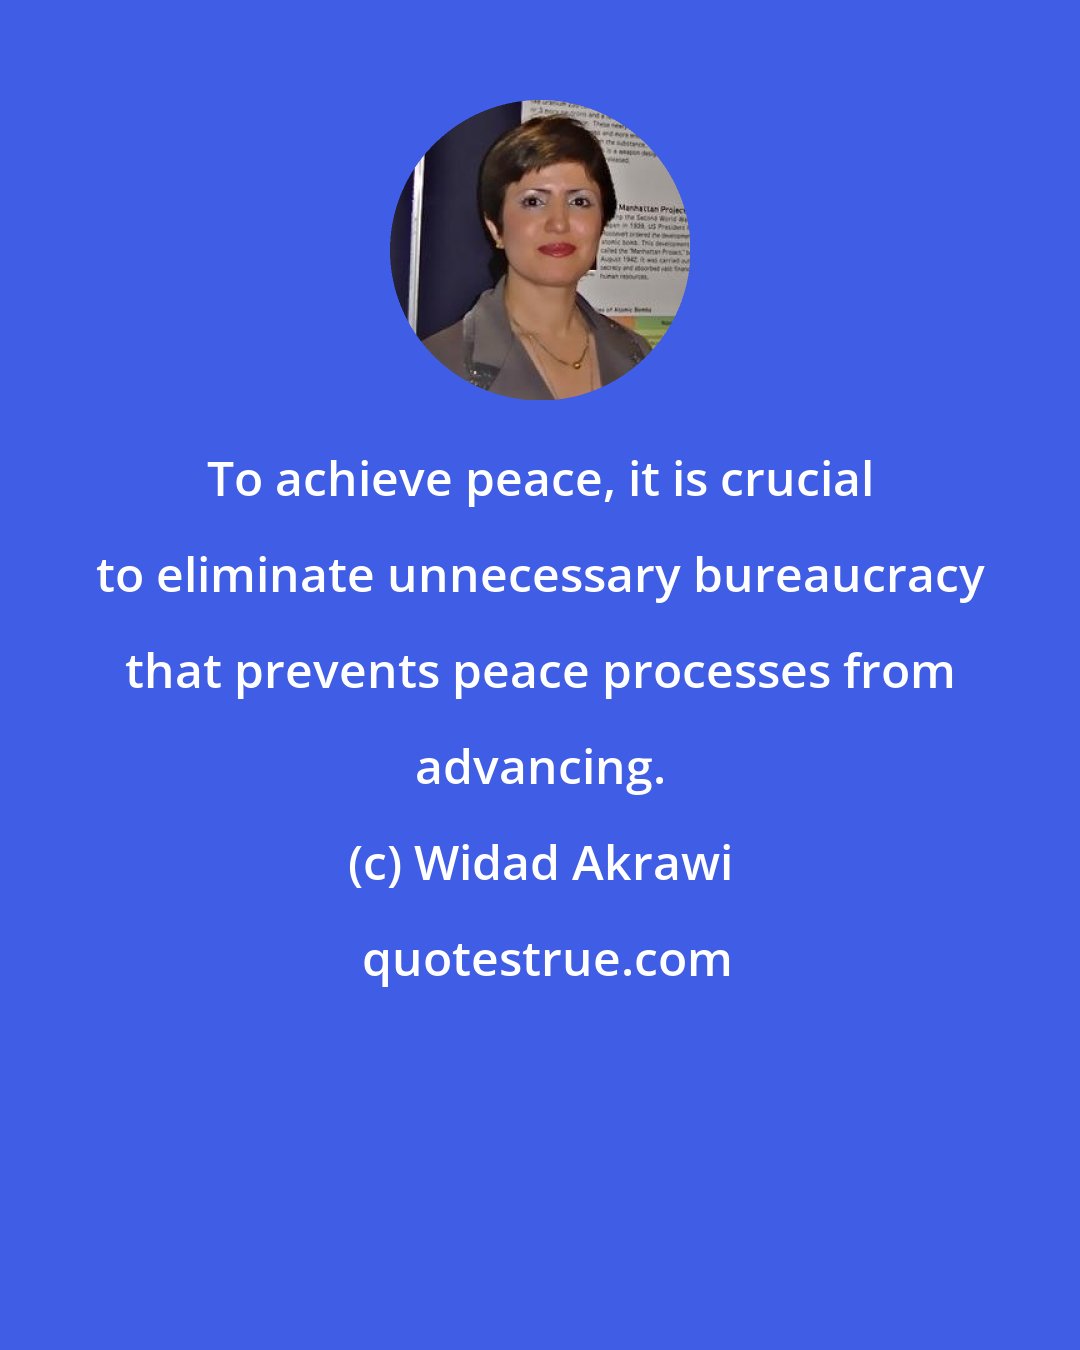 Widad Akrawi: To achieve peace, it is crucial to eliminate unnecessary bureaucracy that prevents peace processes from advancing.